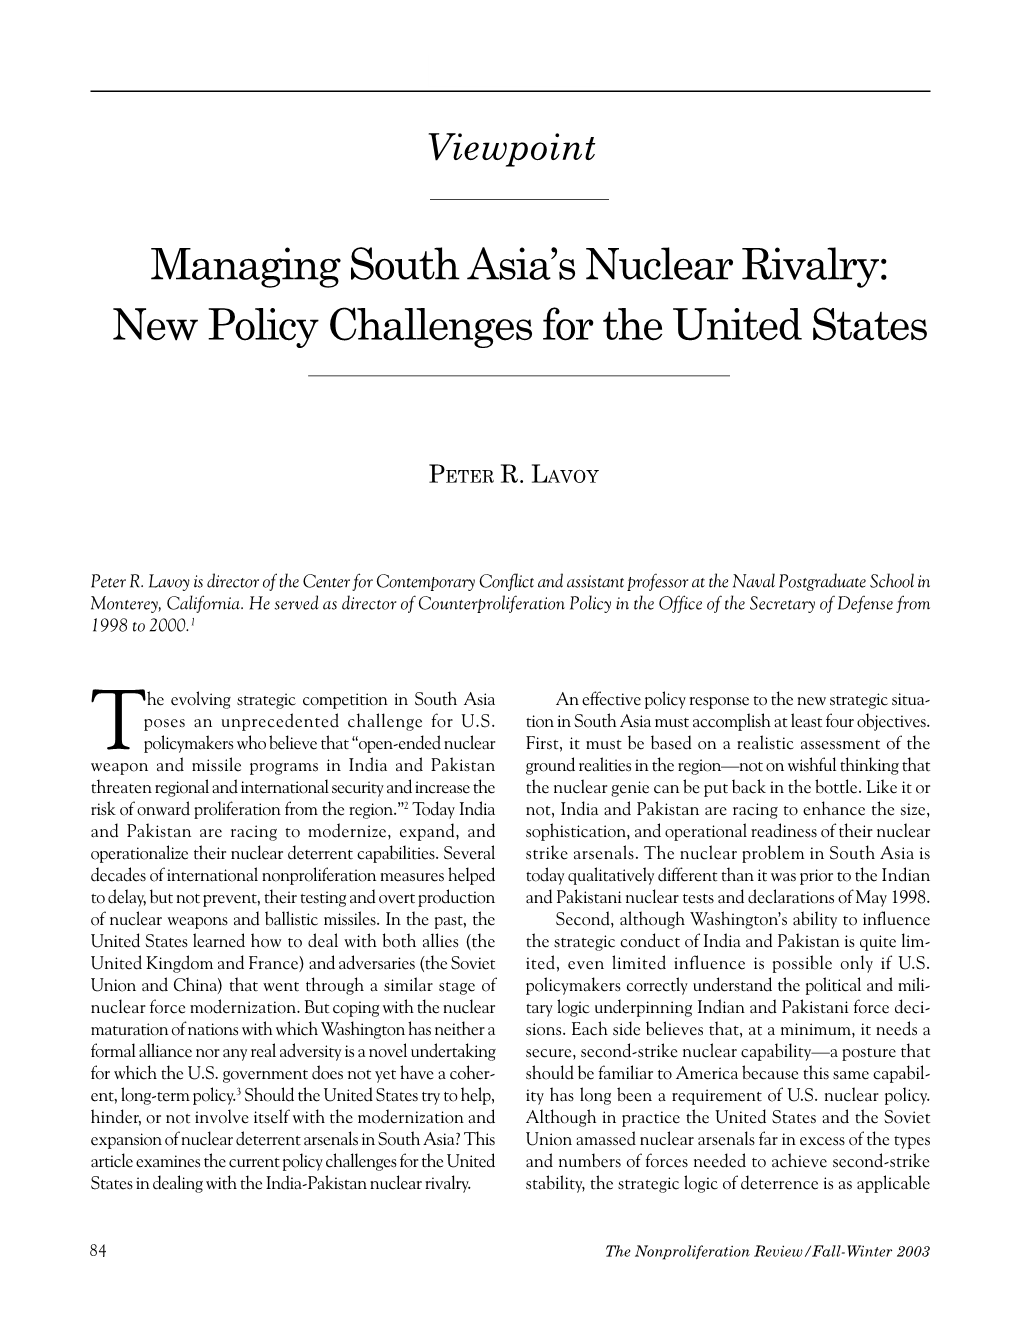 Managing South Asia's Nuclear Rivalry